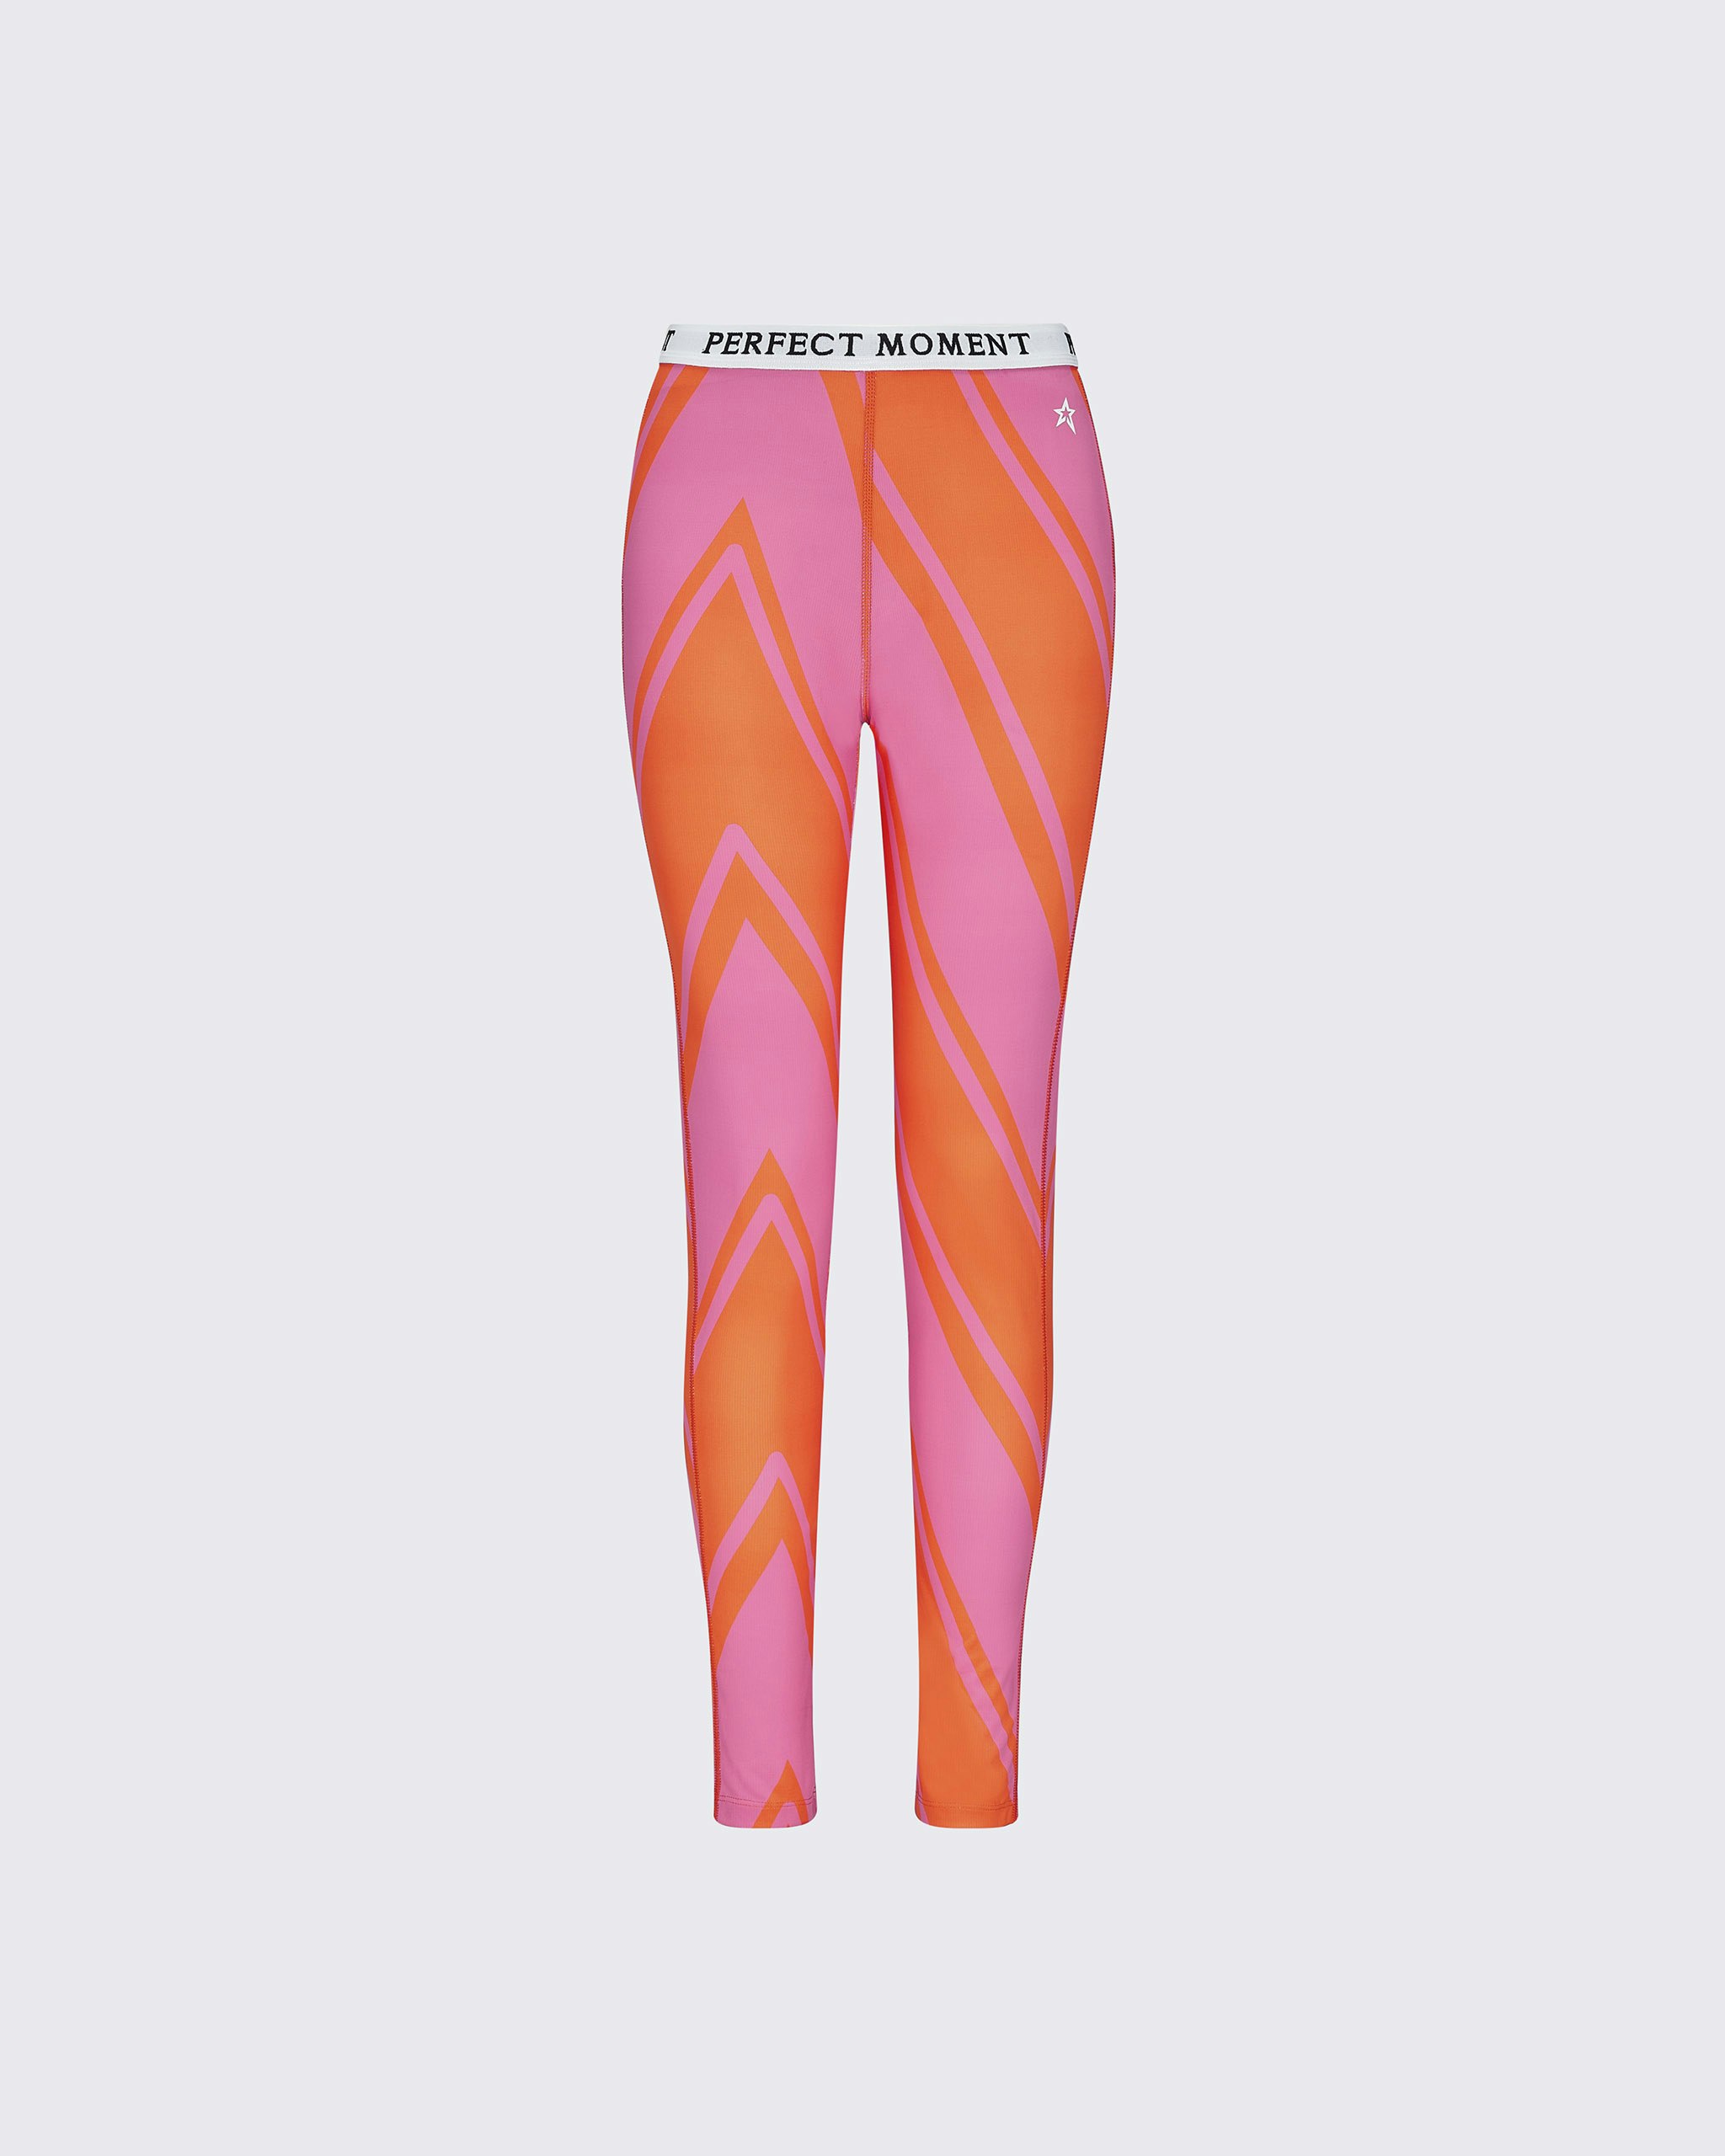 Women's Compression Tights - Fashionable & Functional